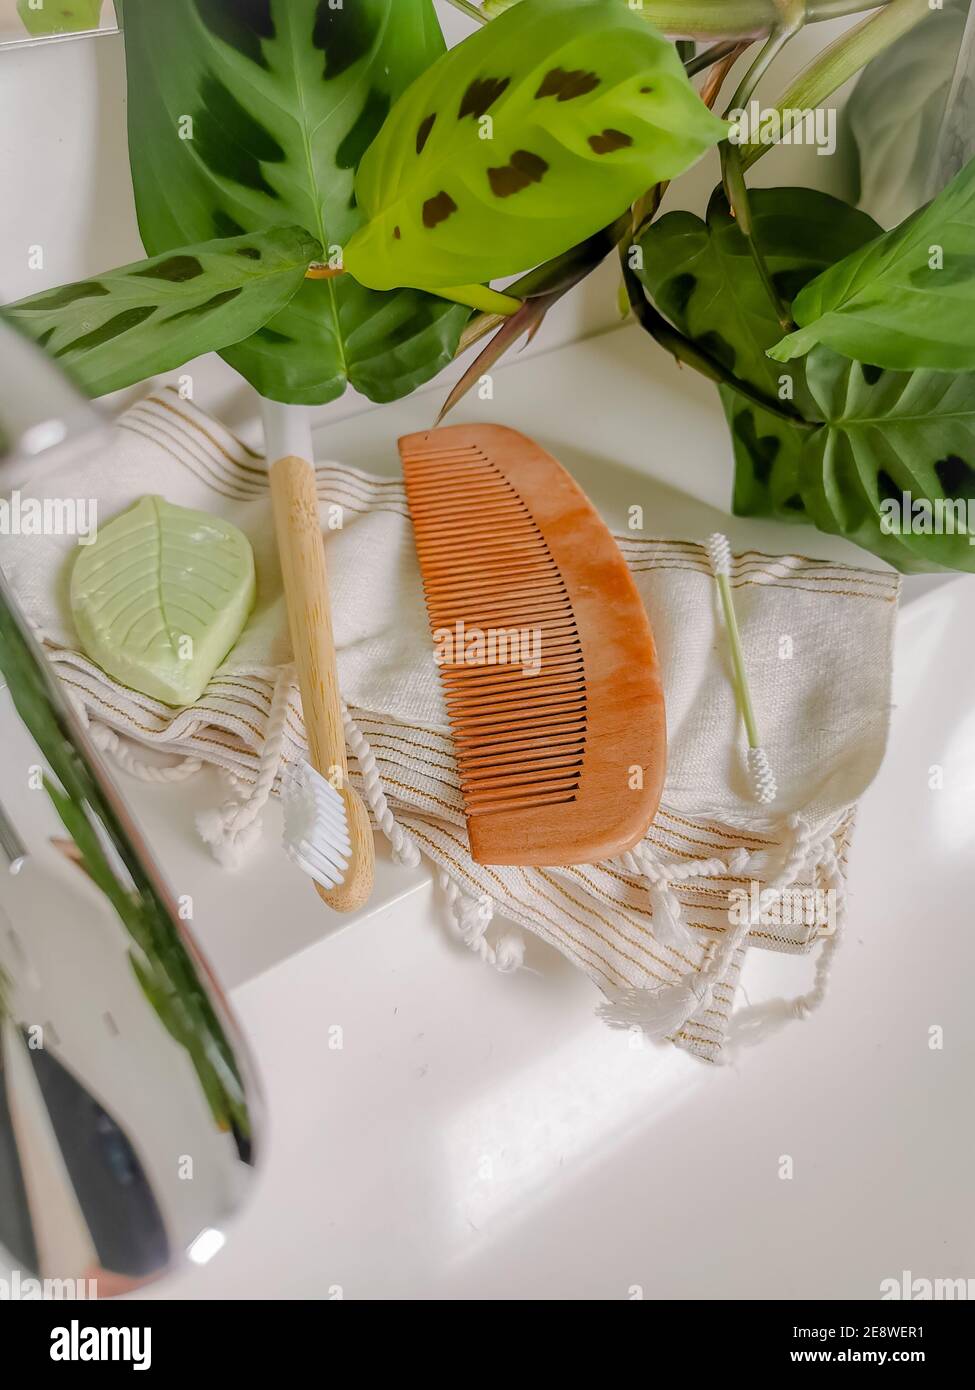 Plastic free and reusable personal care products such as silicone cotton swabs, bamboo toothbrush and comb, and a piece of soap on a bathroom counter. Stock Photo